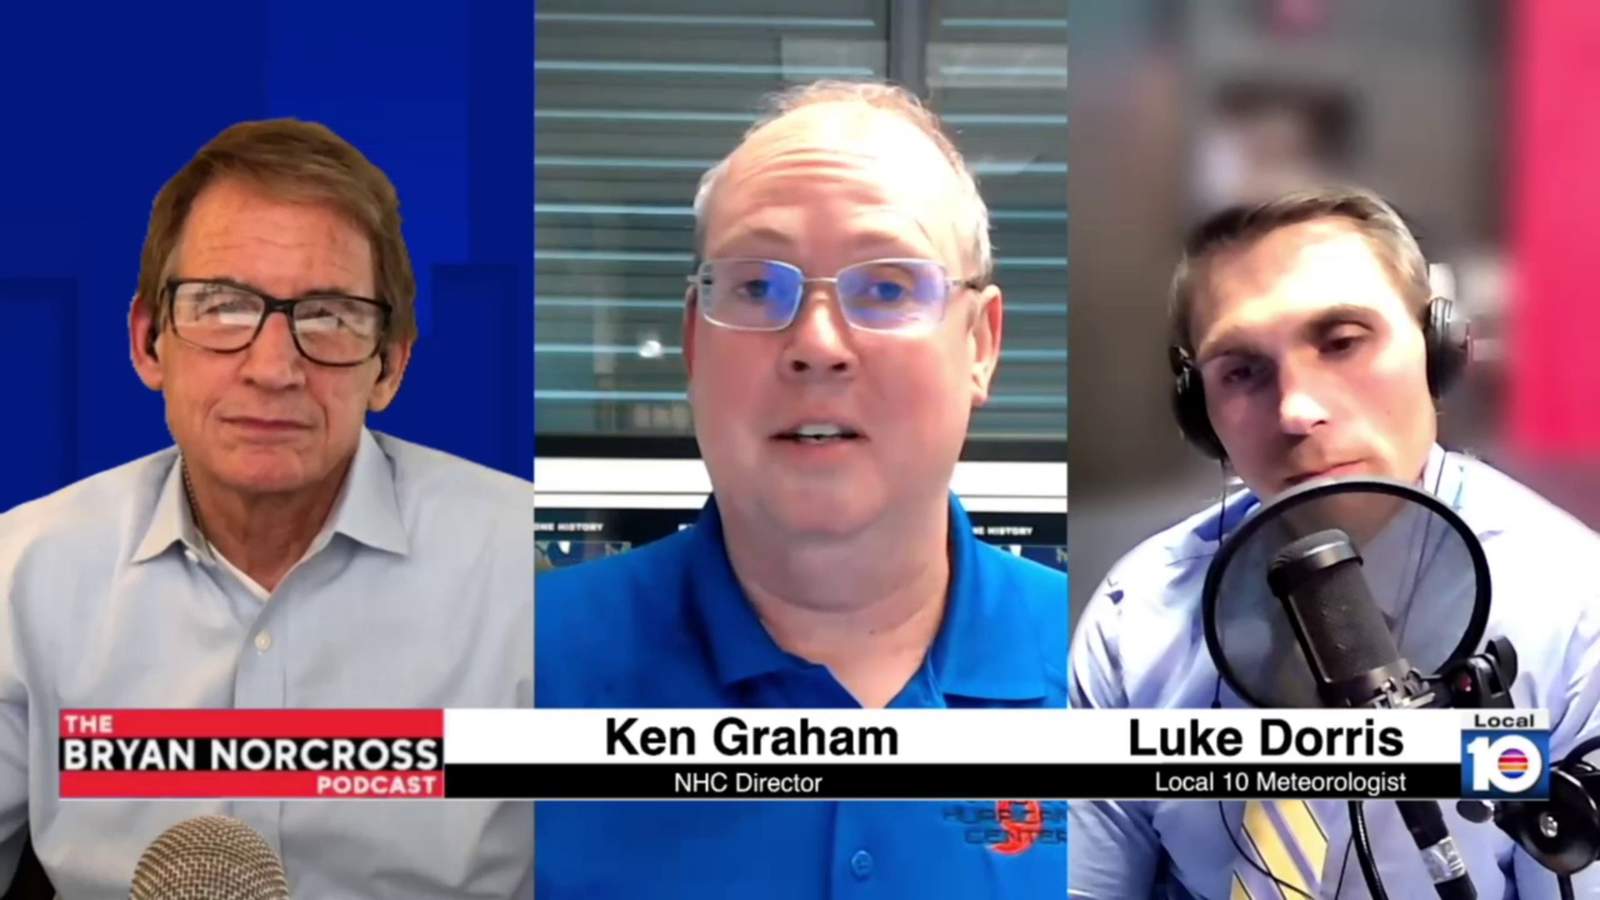 Bryan Norcross Podcast: Early season storms and the challenges of forecasting with National Hurricane Center Director Ken Graham